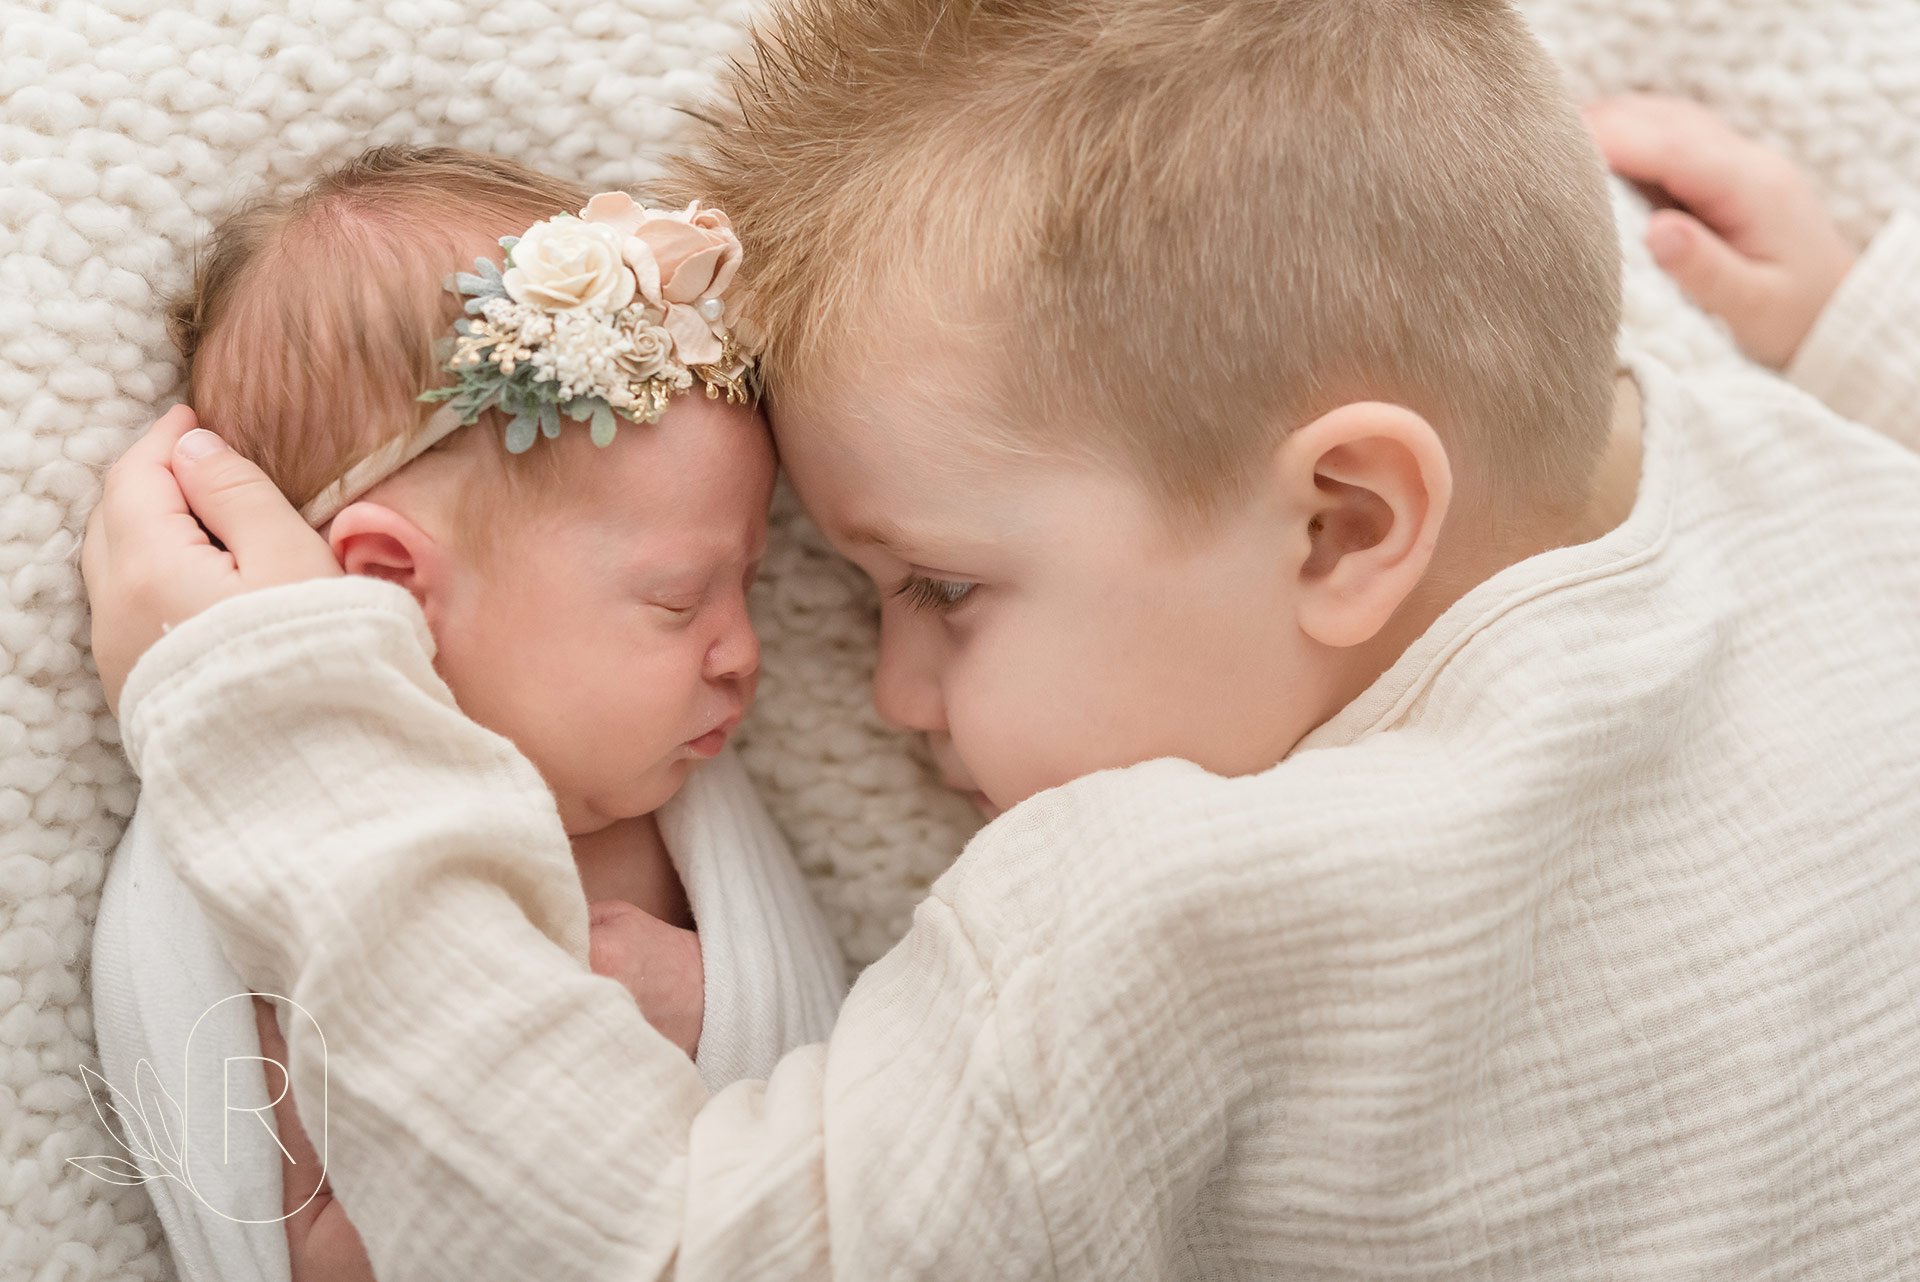 little-newborn-moments-with-sibling-close-up-niagara-ontario-family-photography.jpg